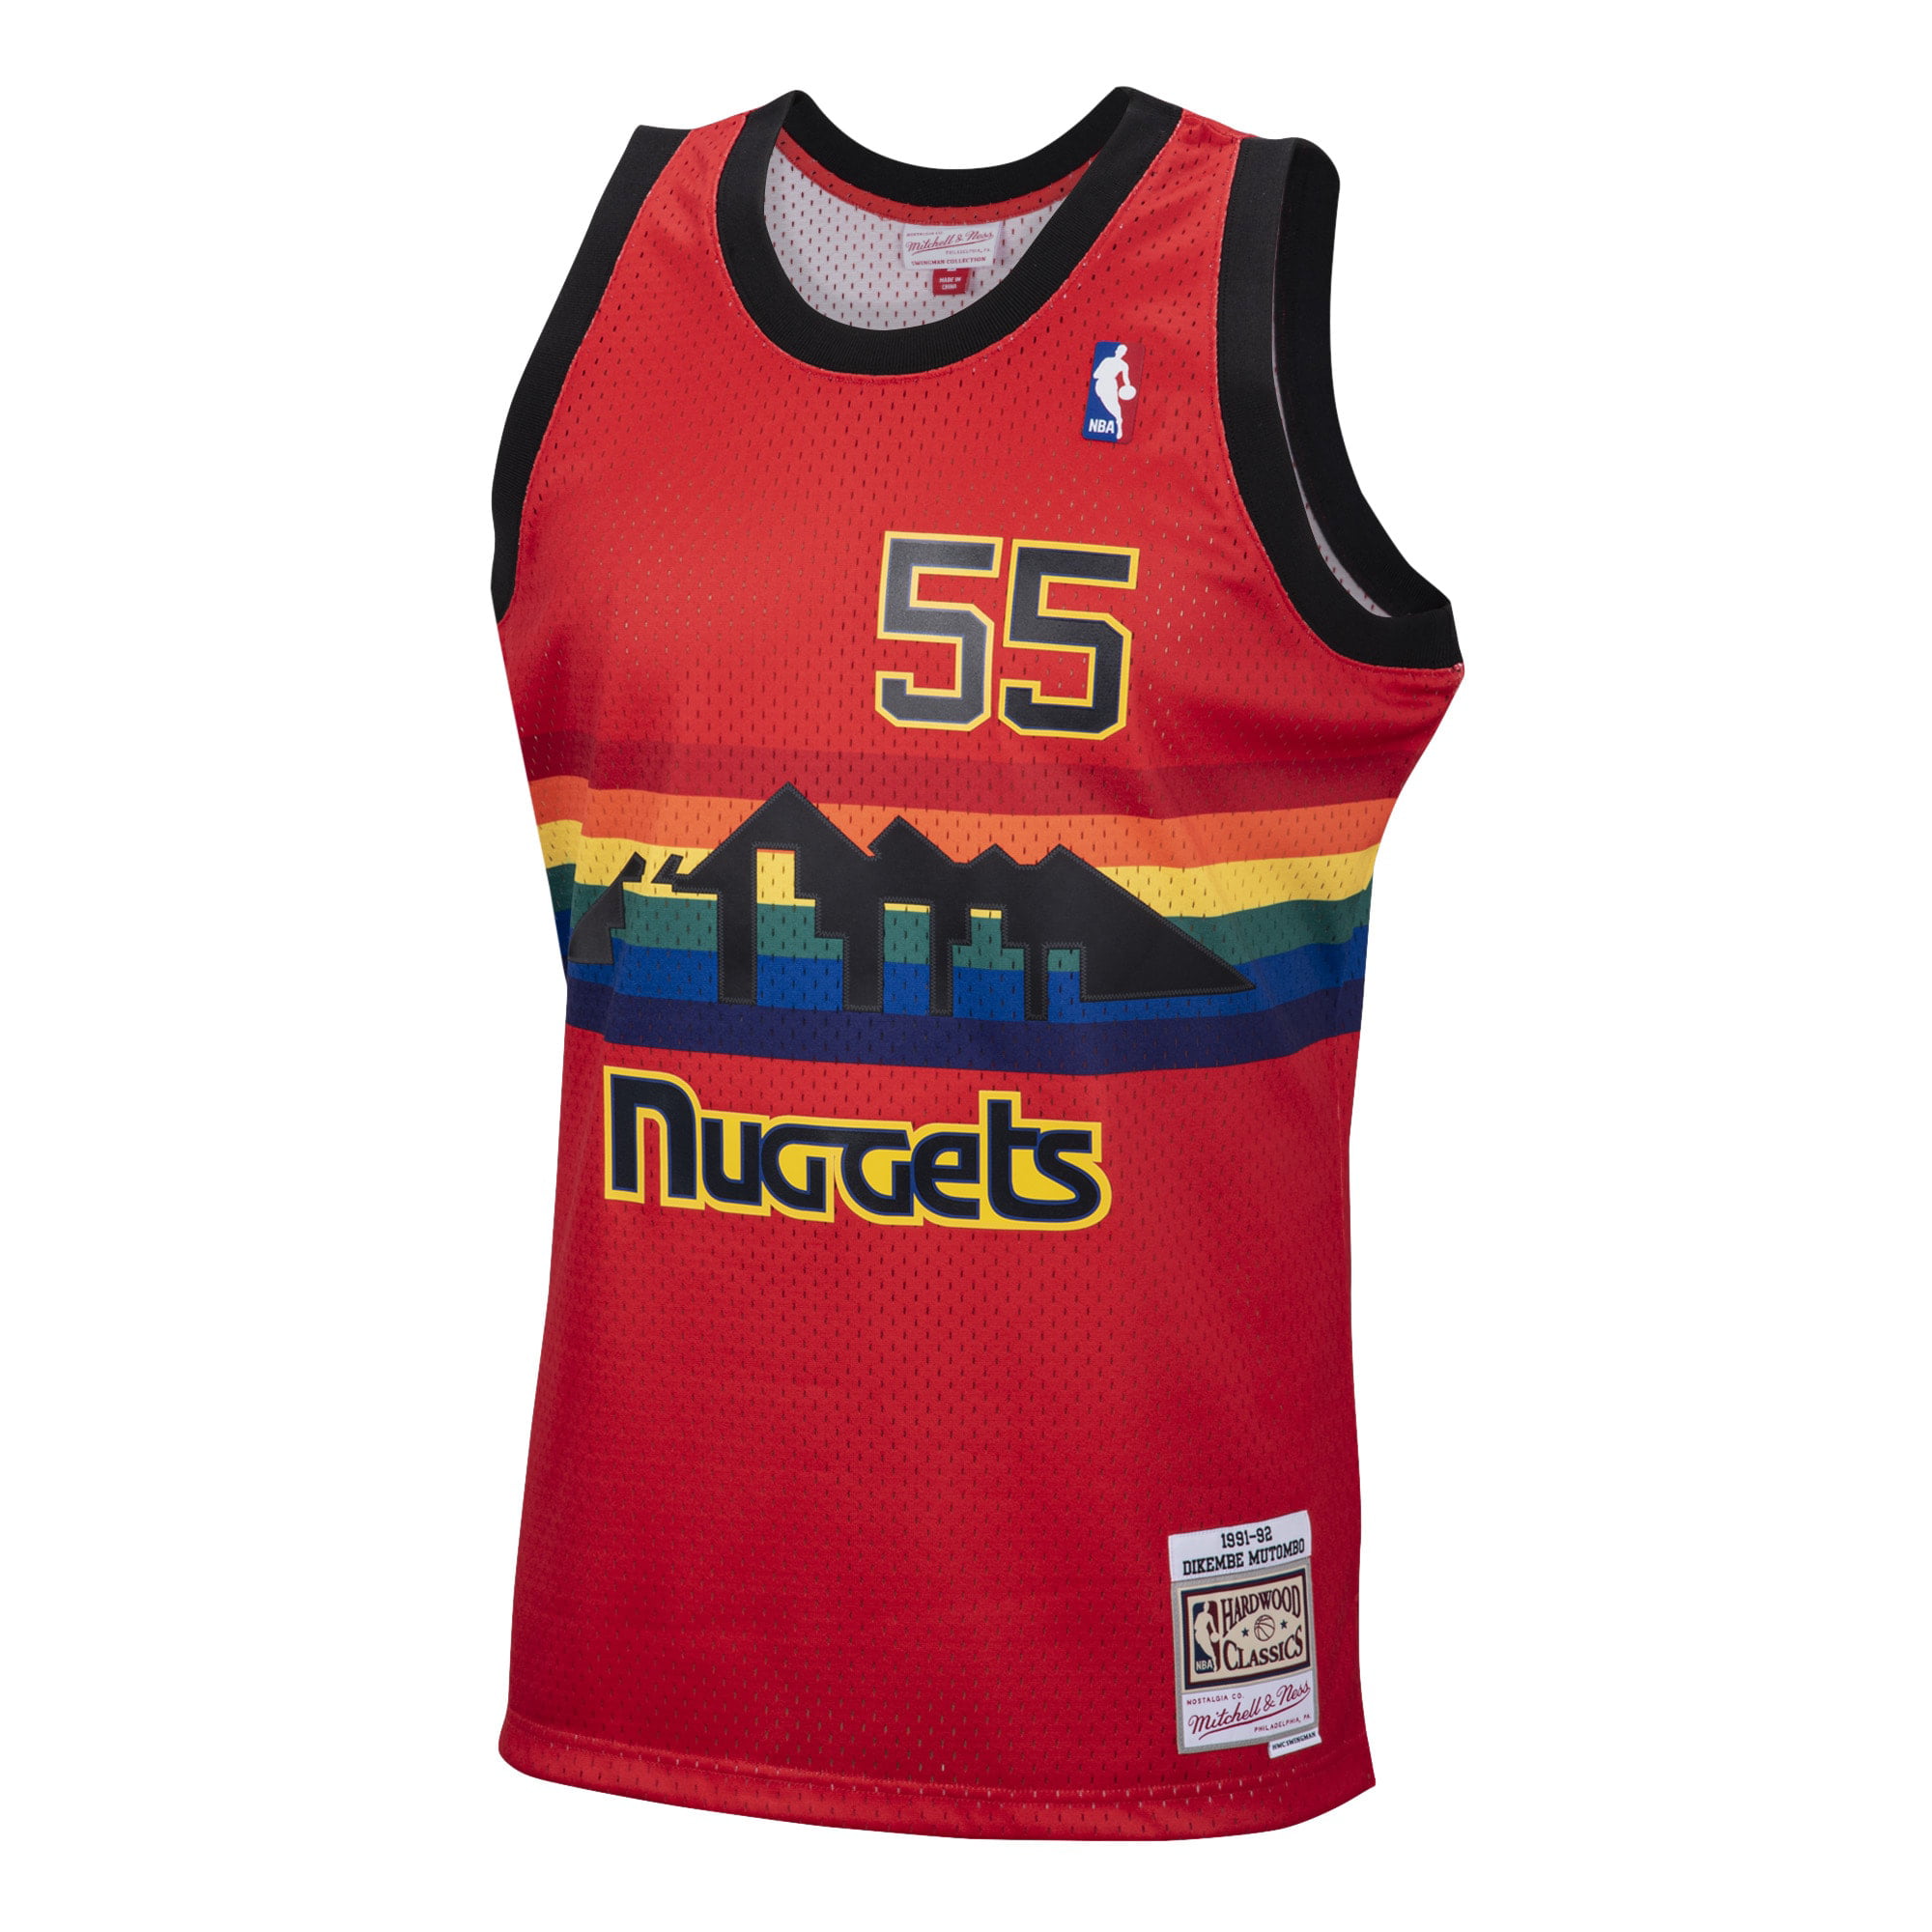 Denver Nuggets #55 Dikembe Mutombo Basketball Jersey 90S Hip Hop Clothing for Party Stitched Letters and Numbers,S